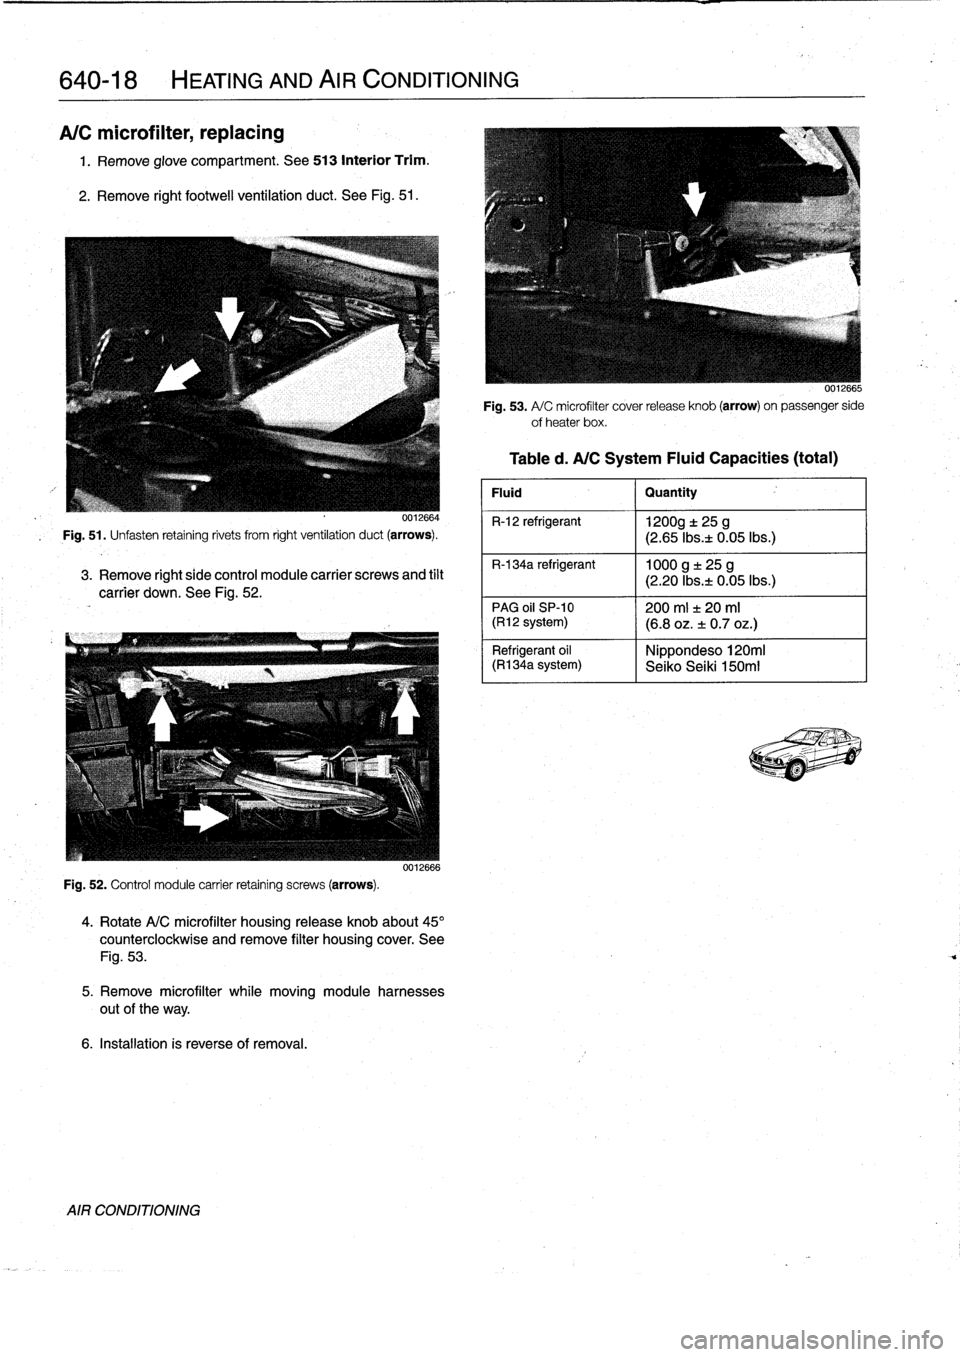 BMW M3 1998 E36 Workshop Manual 
640-18

	

HEATING
AND
AIR
CONDITIONING

A/C
microfilter,
replacing

1
.
Remove
glove
compartment
.
See
513
Interior
Trim
.

2
.
Remove
right
footwell
ventilation
duct
.
See
Fig
.
51
.

0012664

Fig
